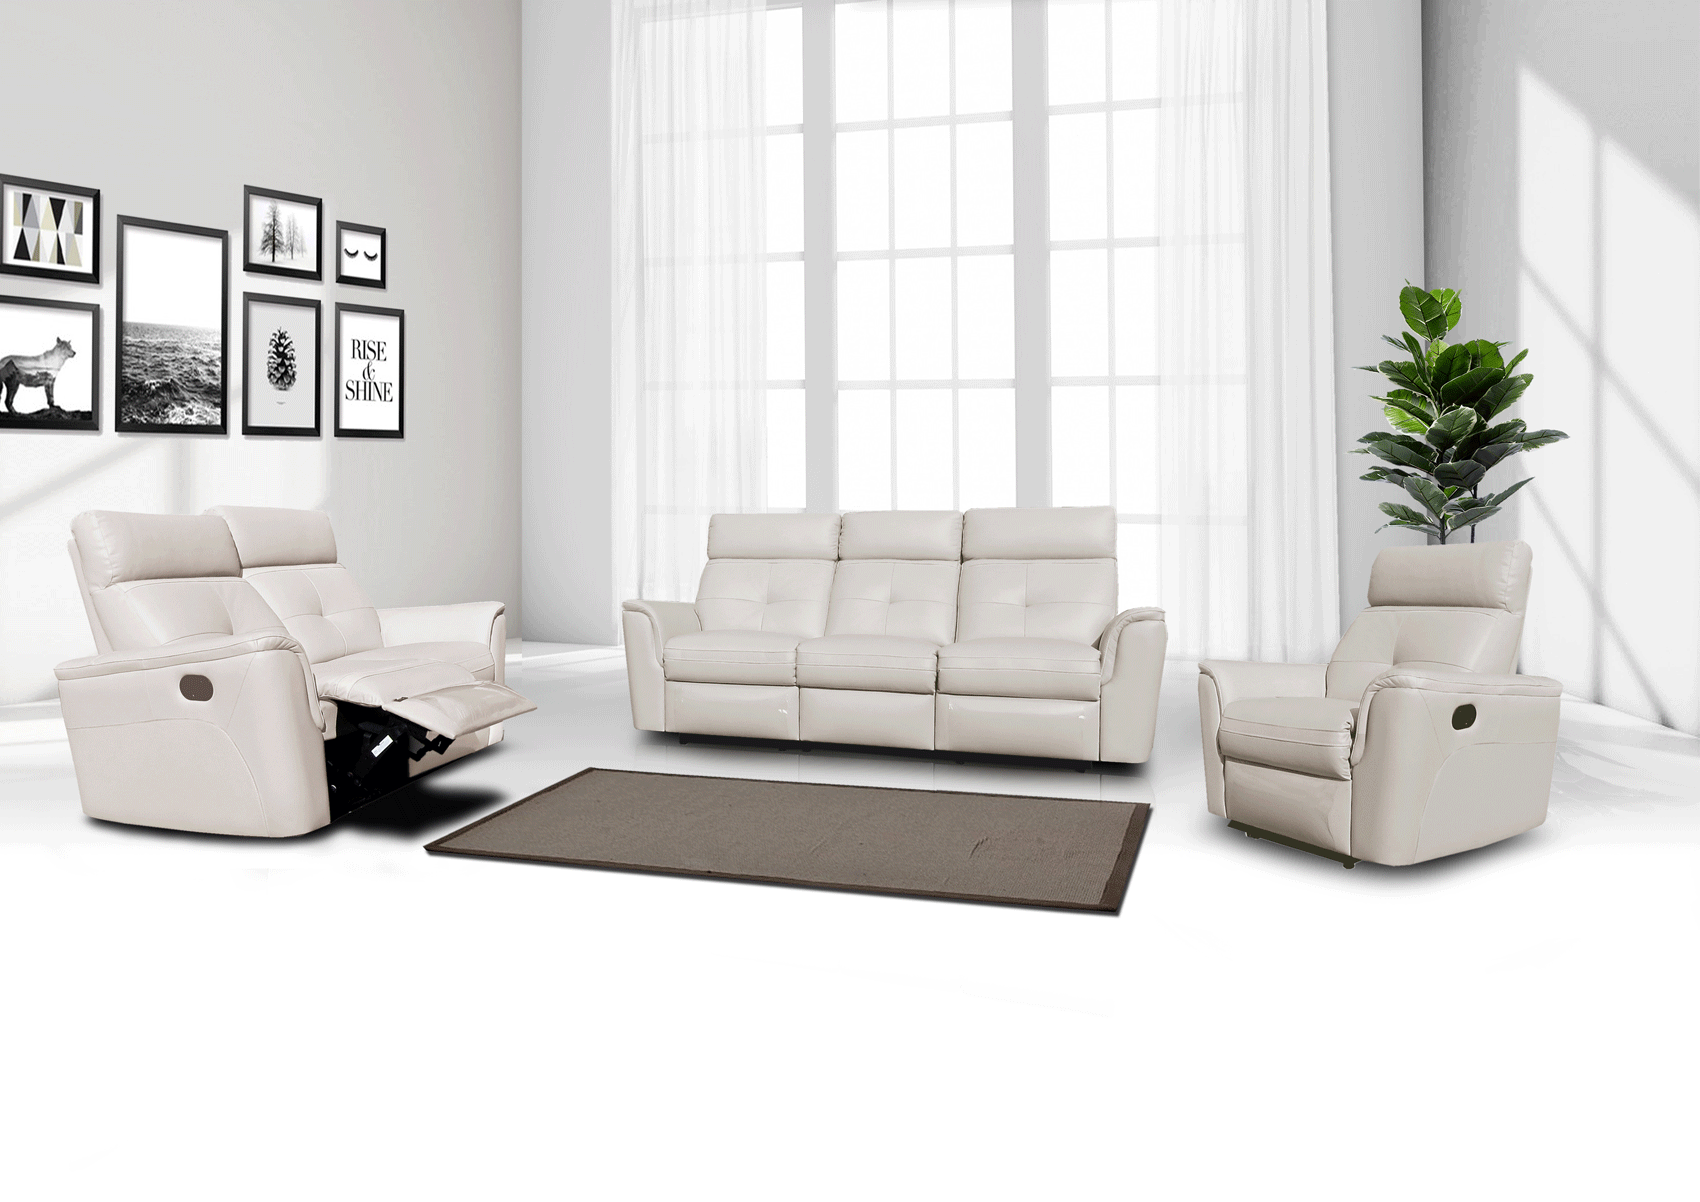 Clearance Living Room 8501 White w/Manual Recliners